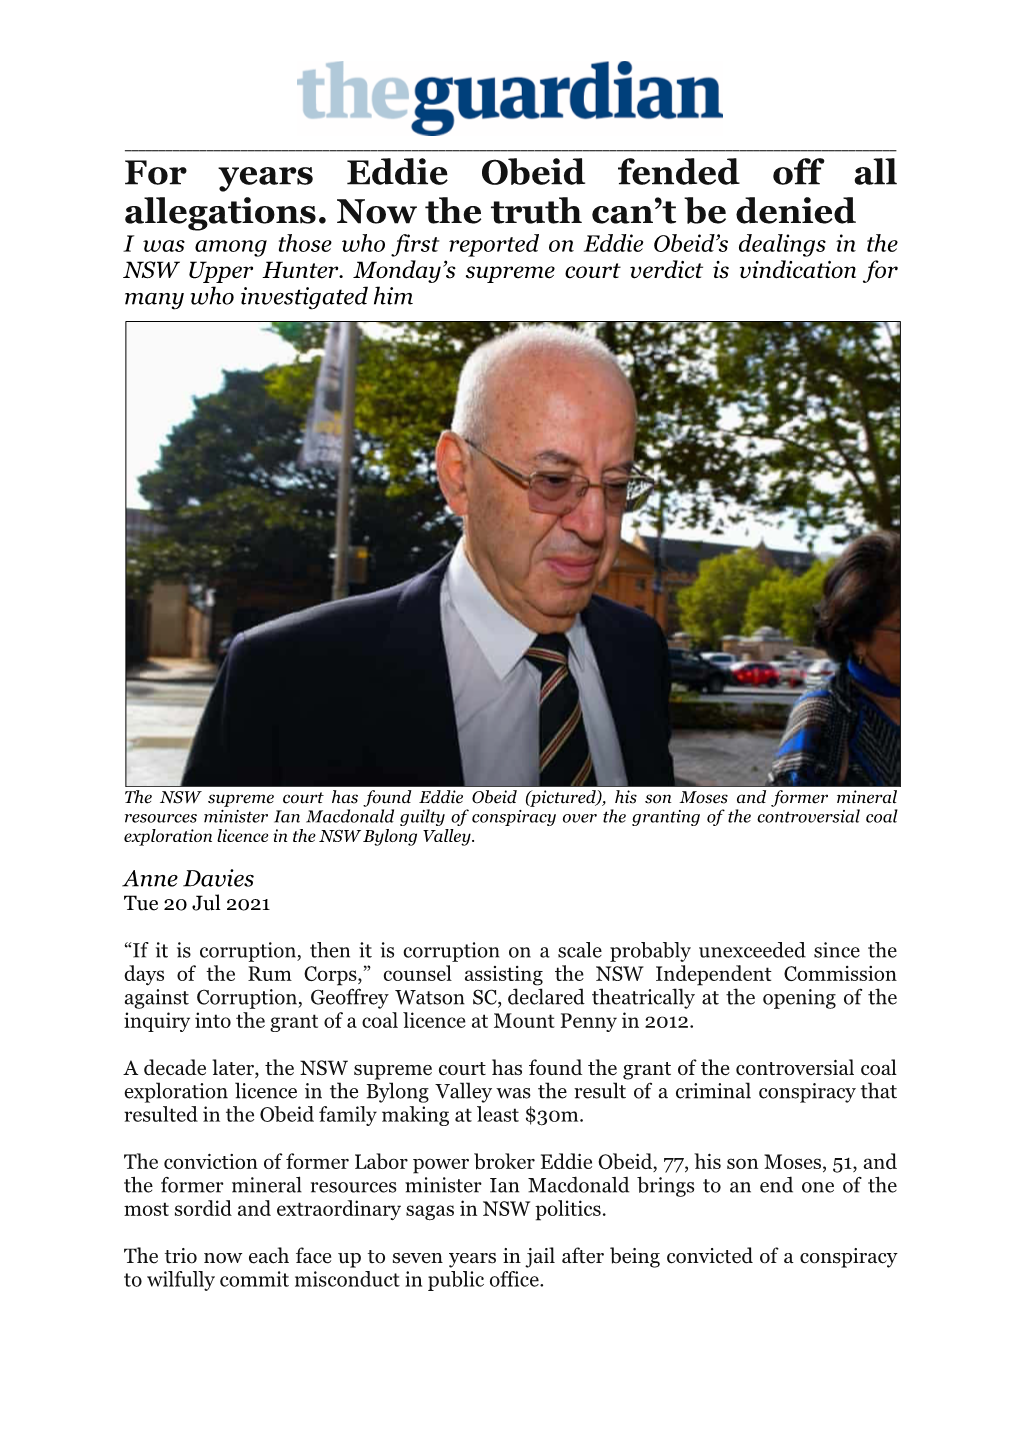 For Years Eddie Obeid Fended Off All Allegations. Now the Truth Can't Be